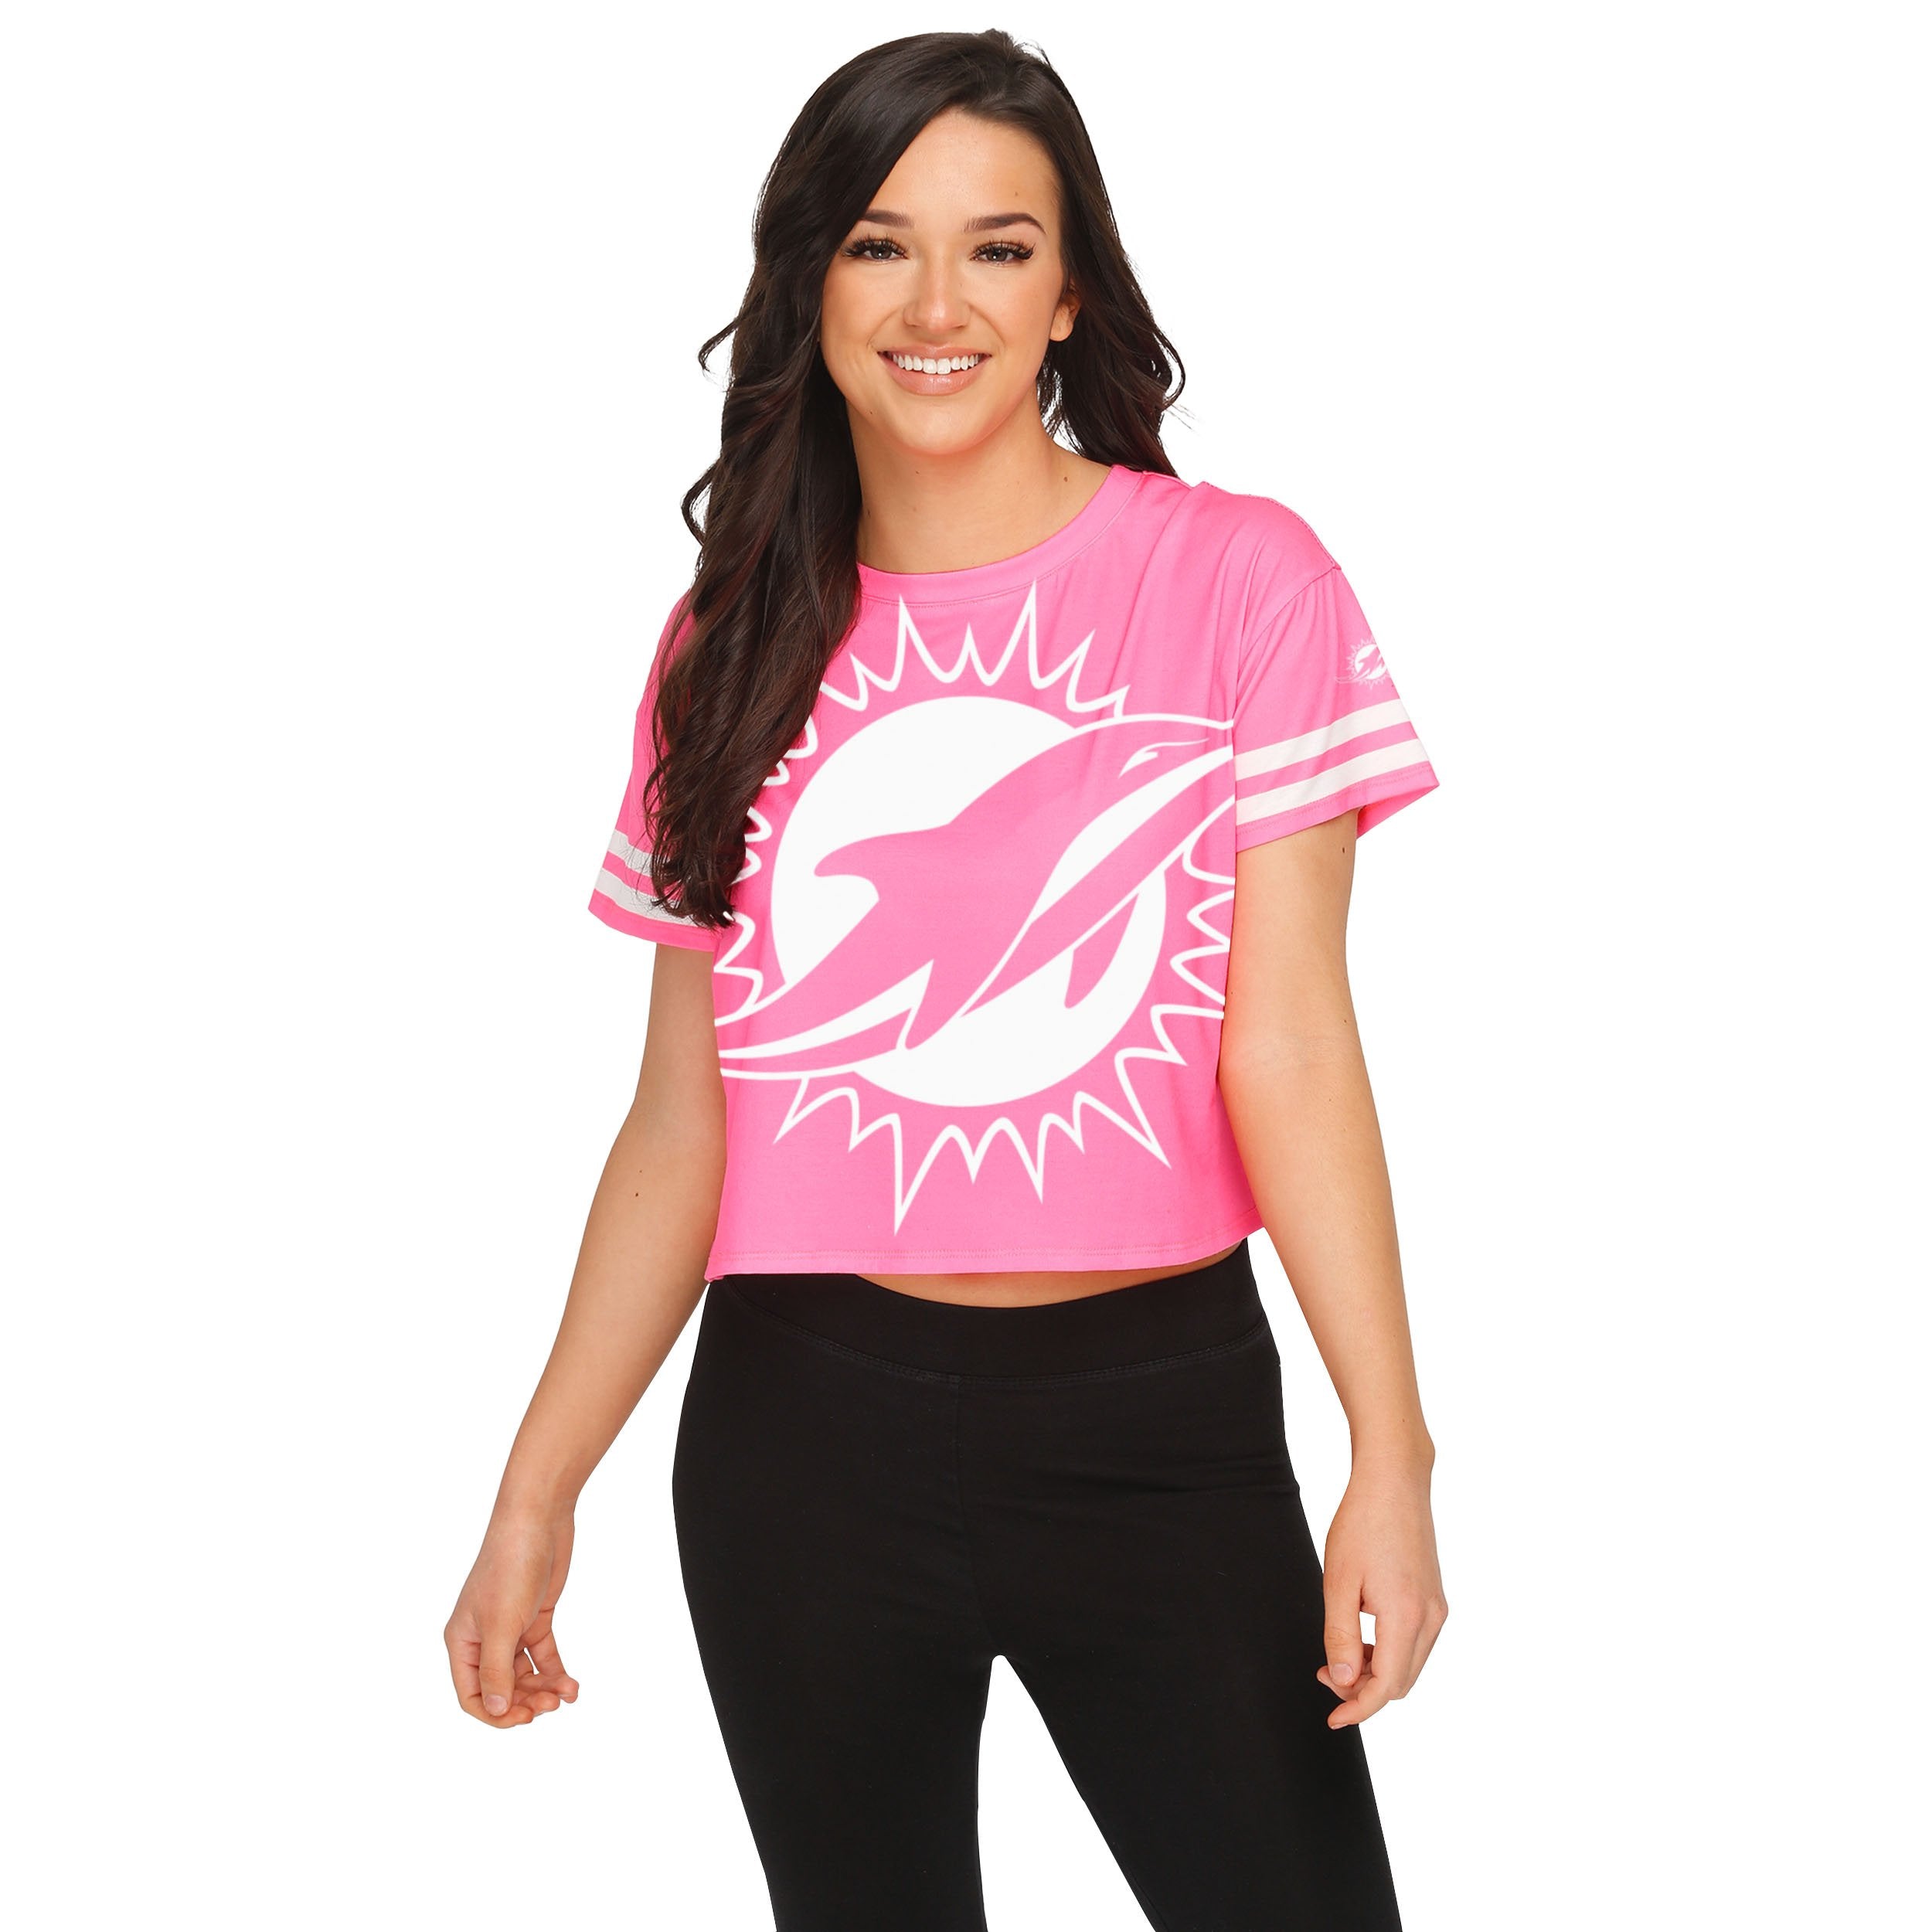 Miami Dolphins NFL Womens Highlights Crop Top